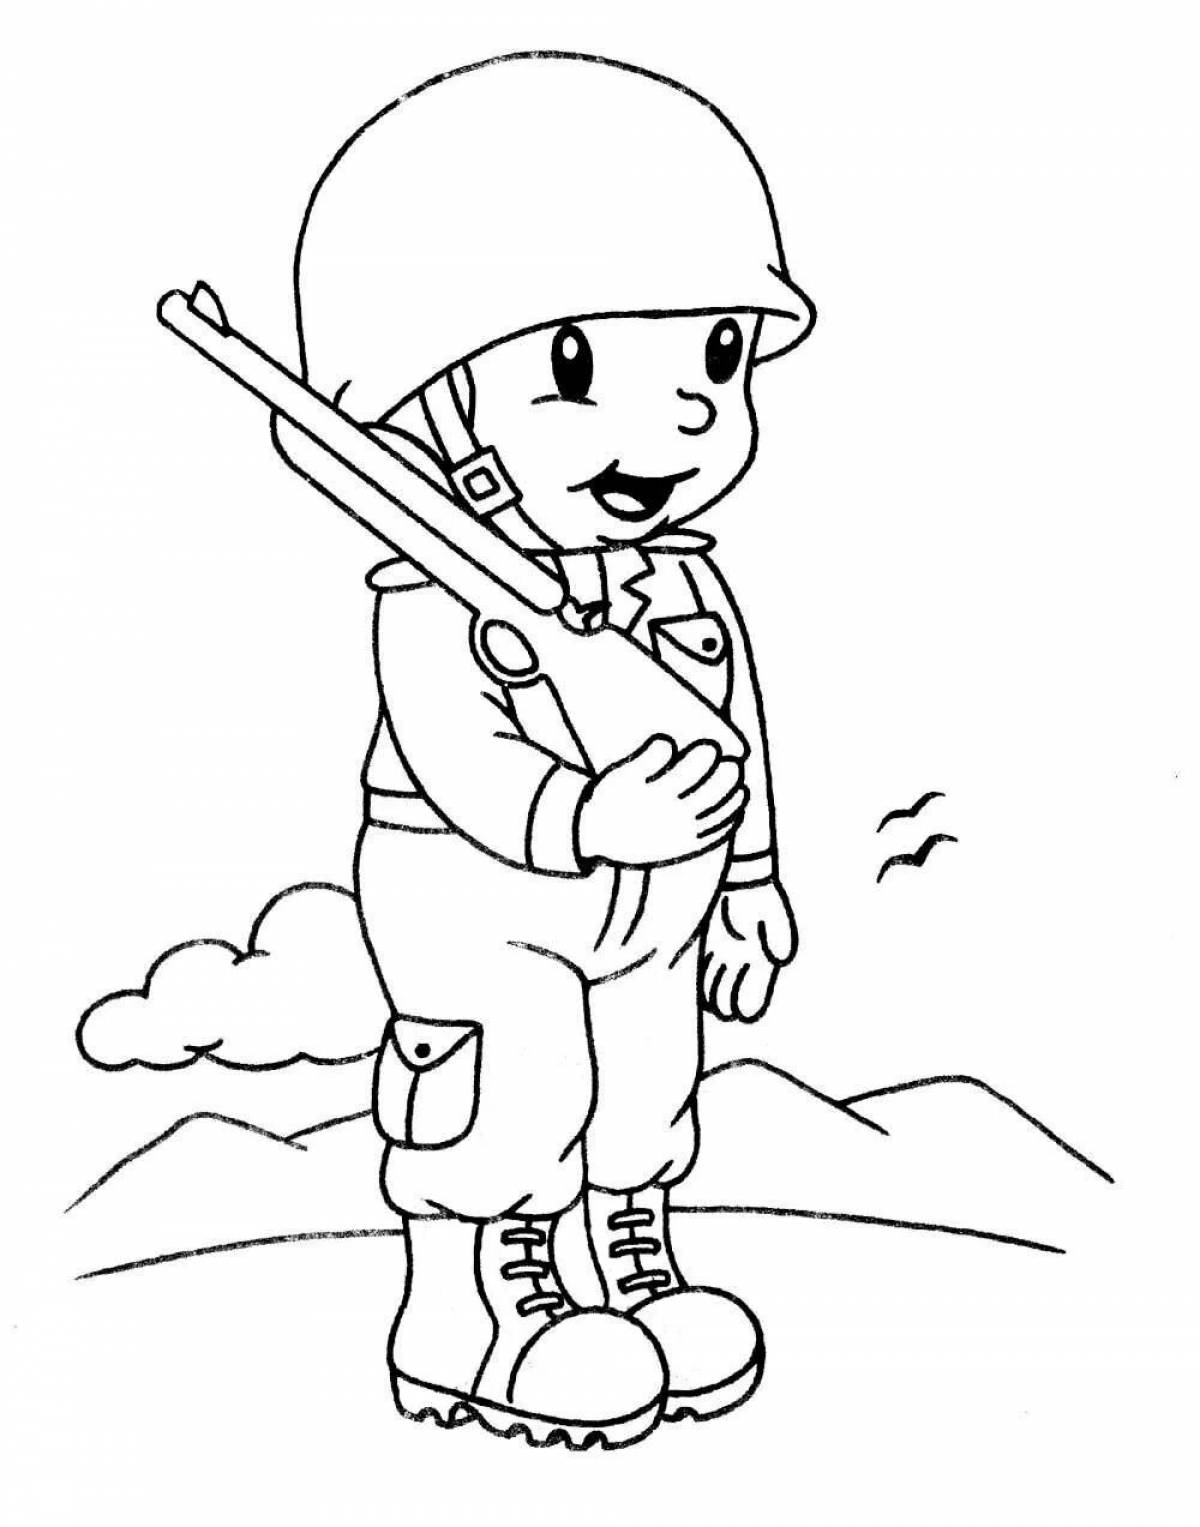 Coloring page brave soldier and child